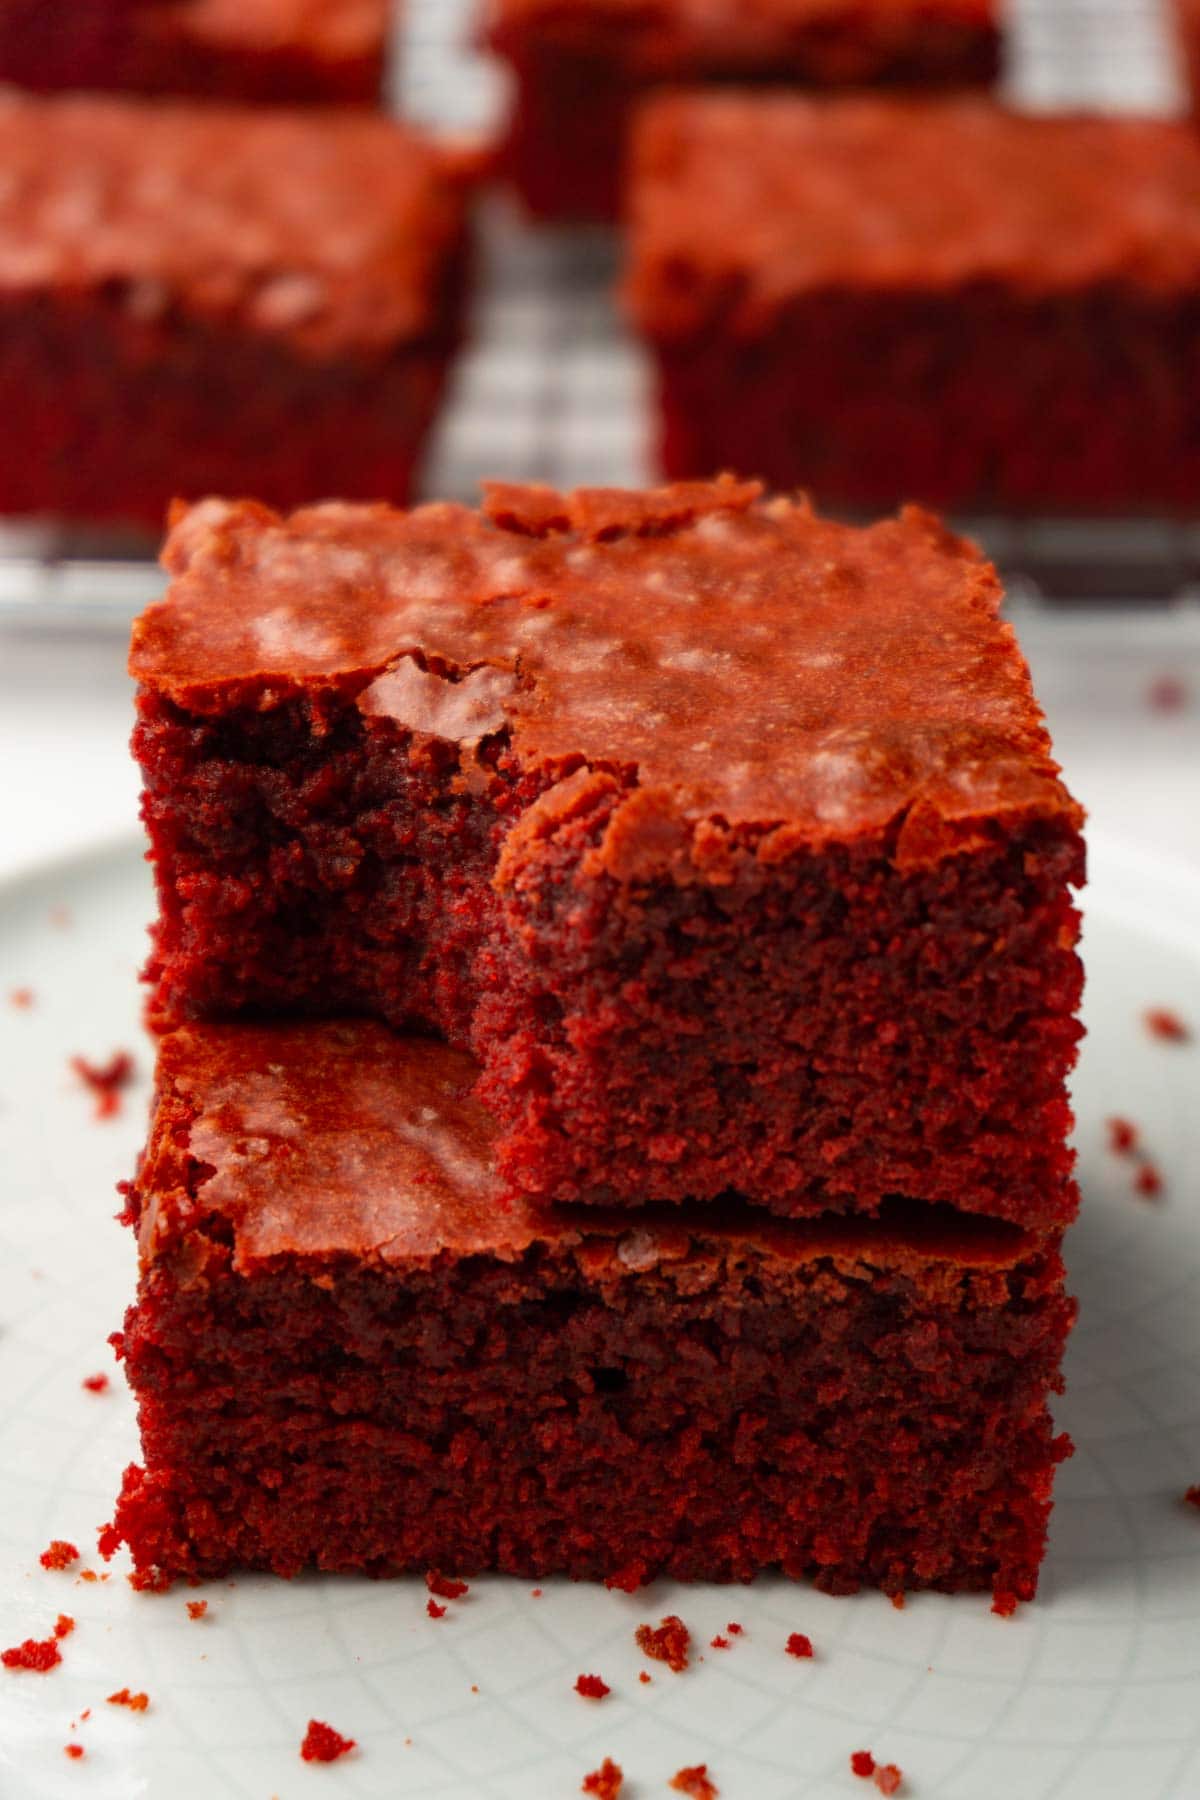 Two pieces of red velvet brownies stacked on top of each other, one bite taken from the top piece.